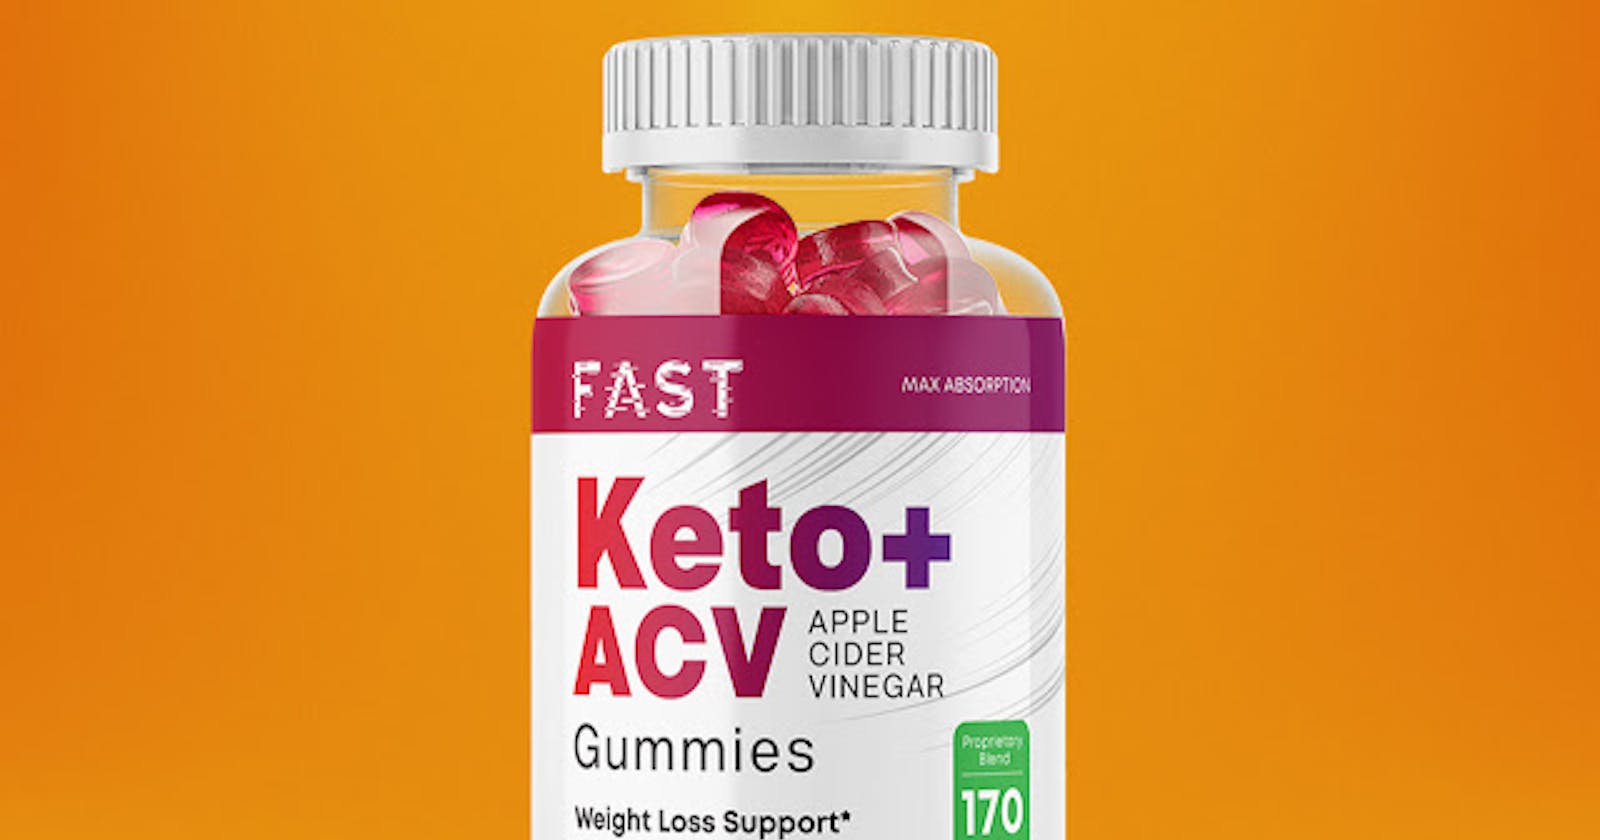 Pro Fast Keto + ACV Gummies Instant Result For Loose Weight!